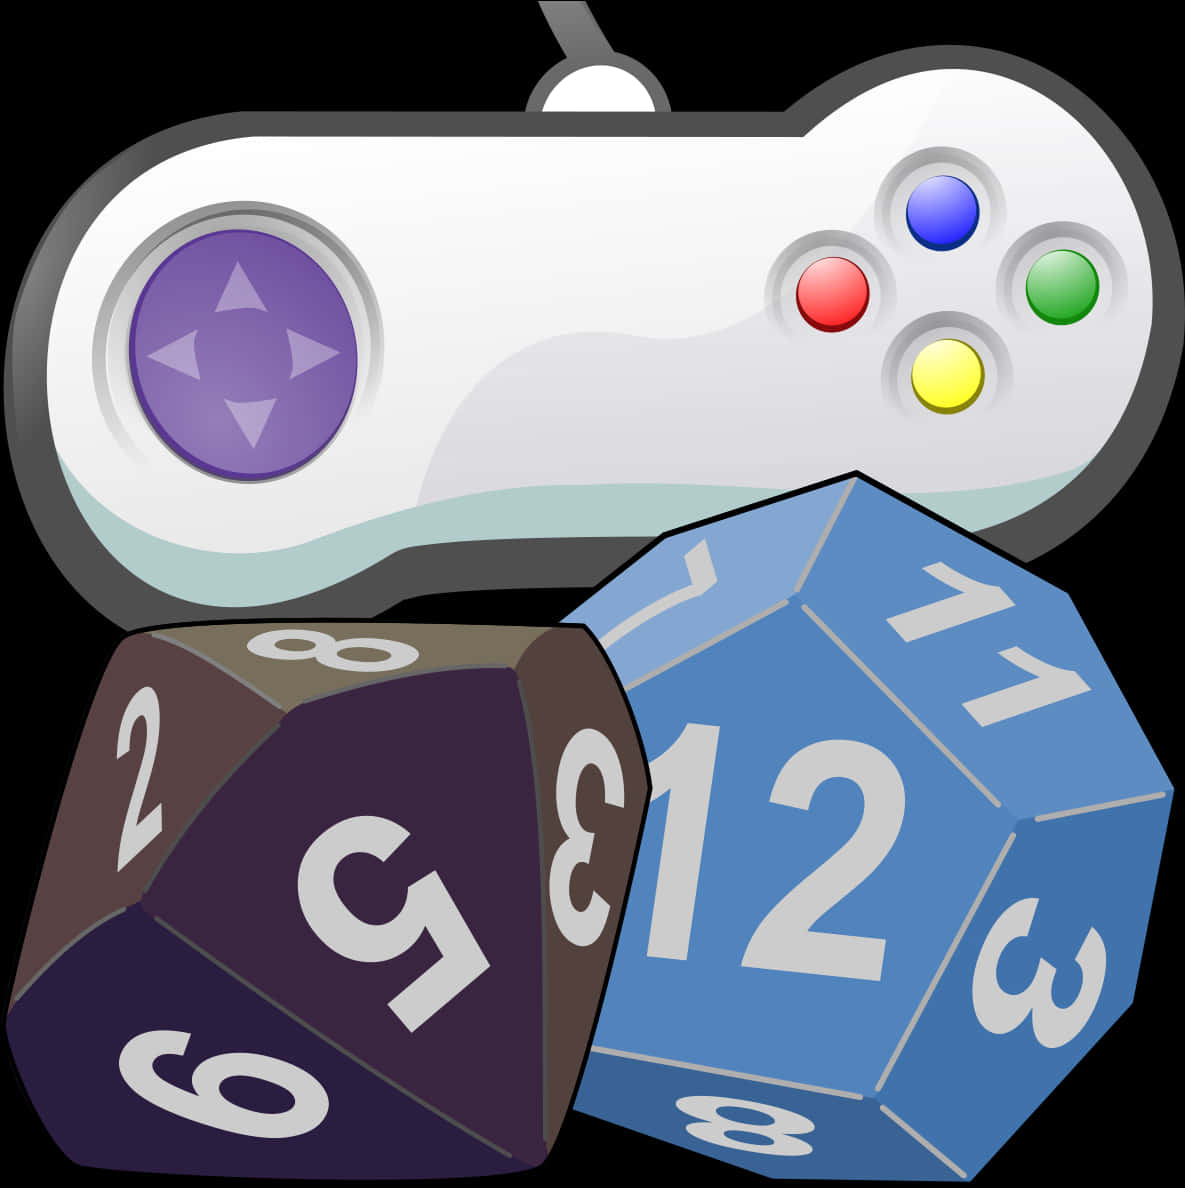 A Game Controller And Two Different Dice